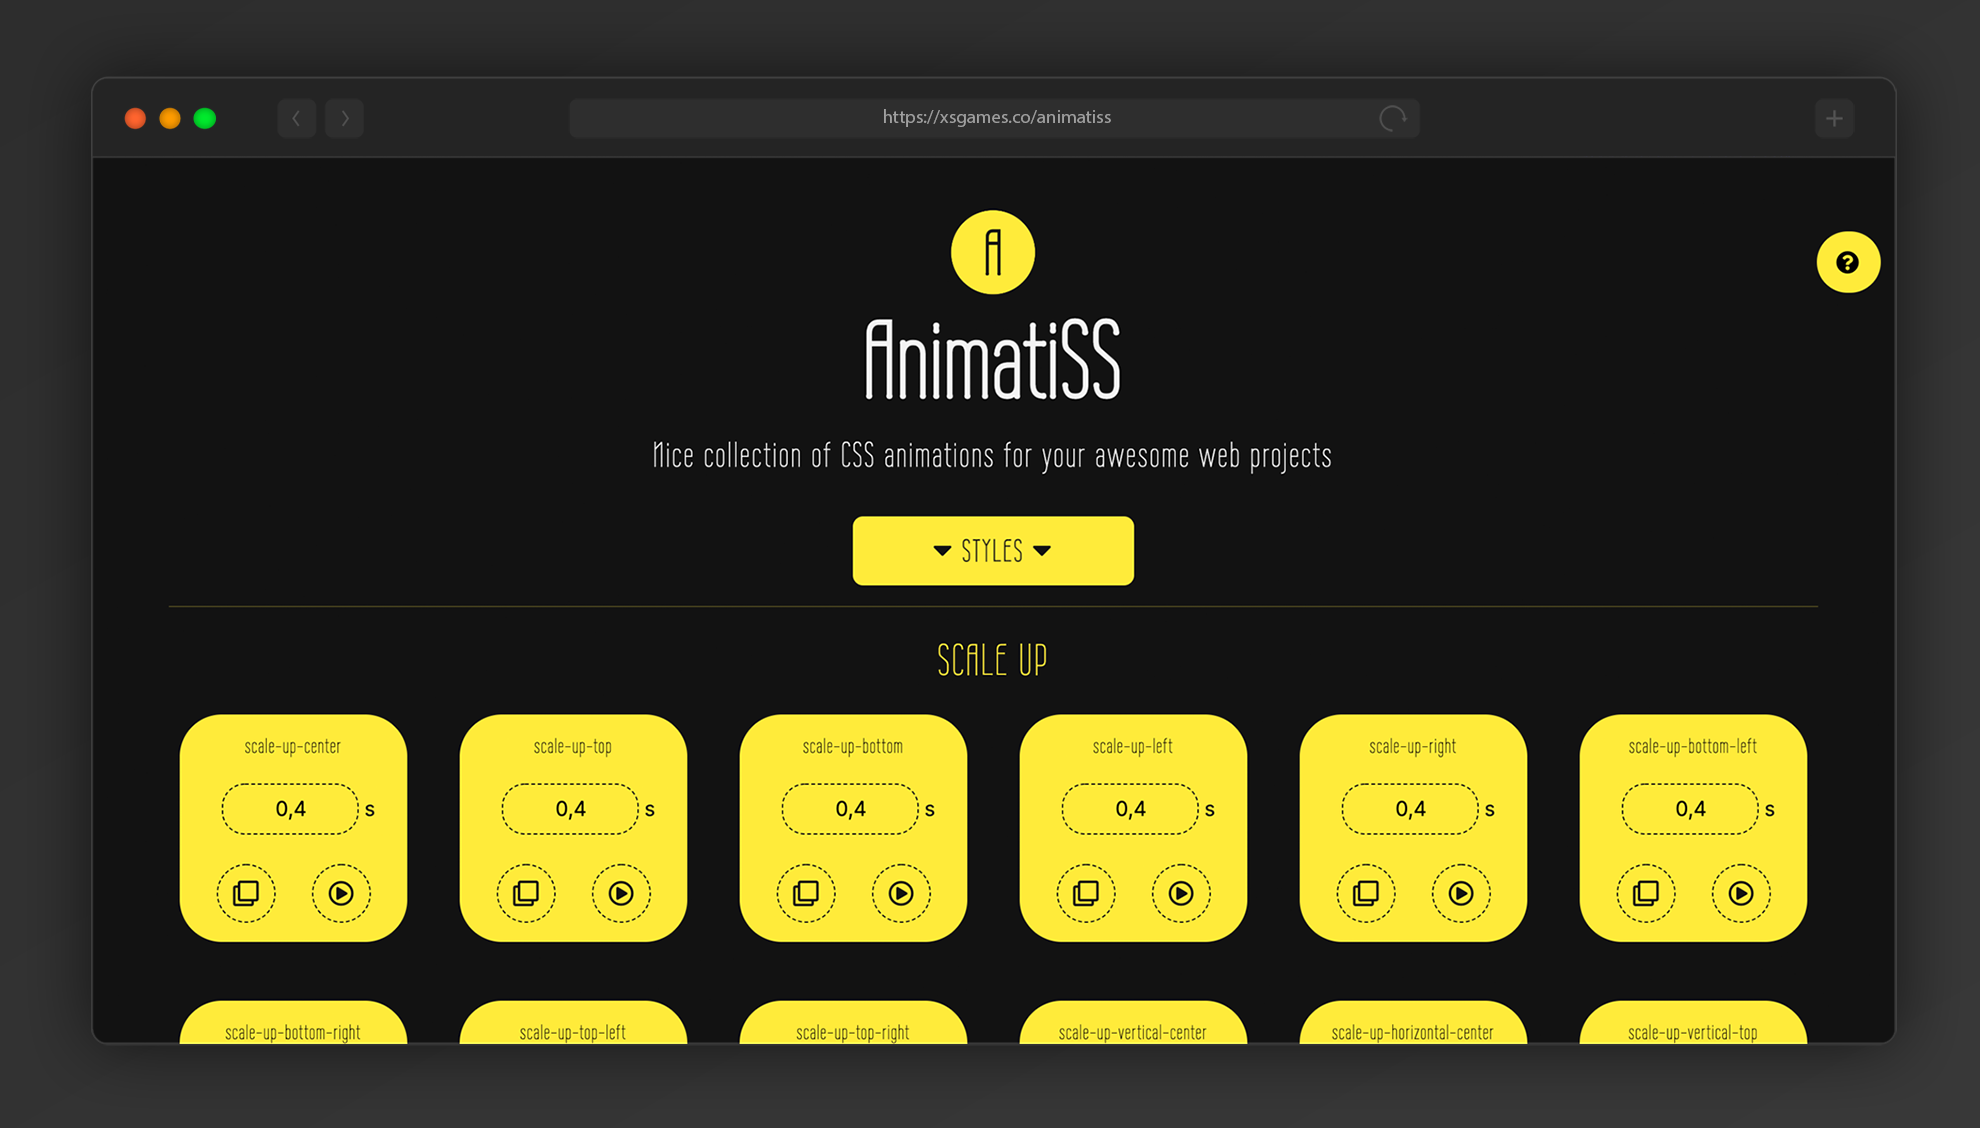 AnimatiSS - A nice, colorful collection of CSS animations for your projects